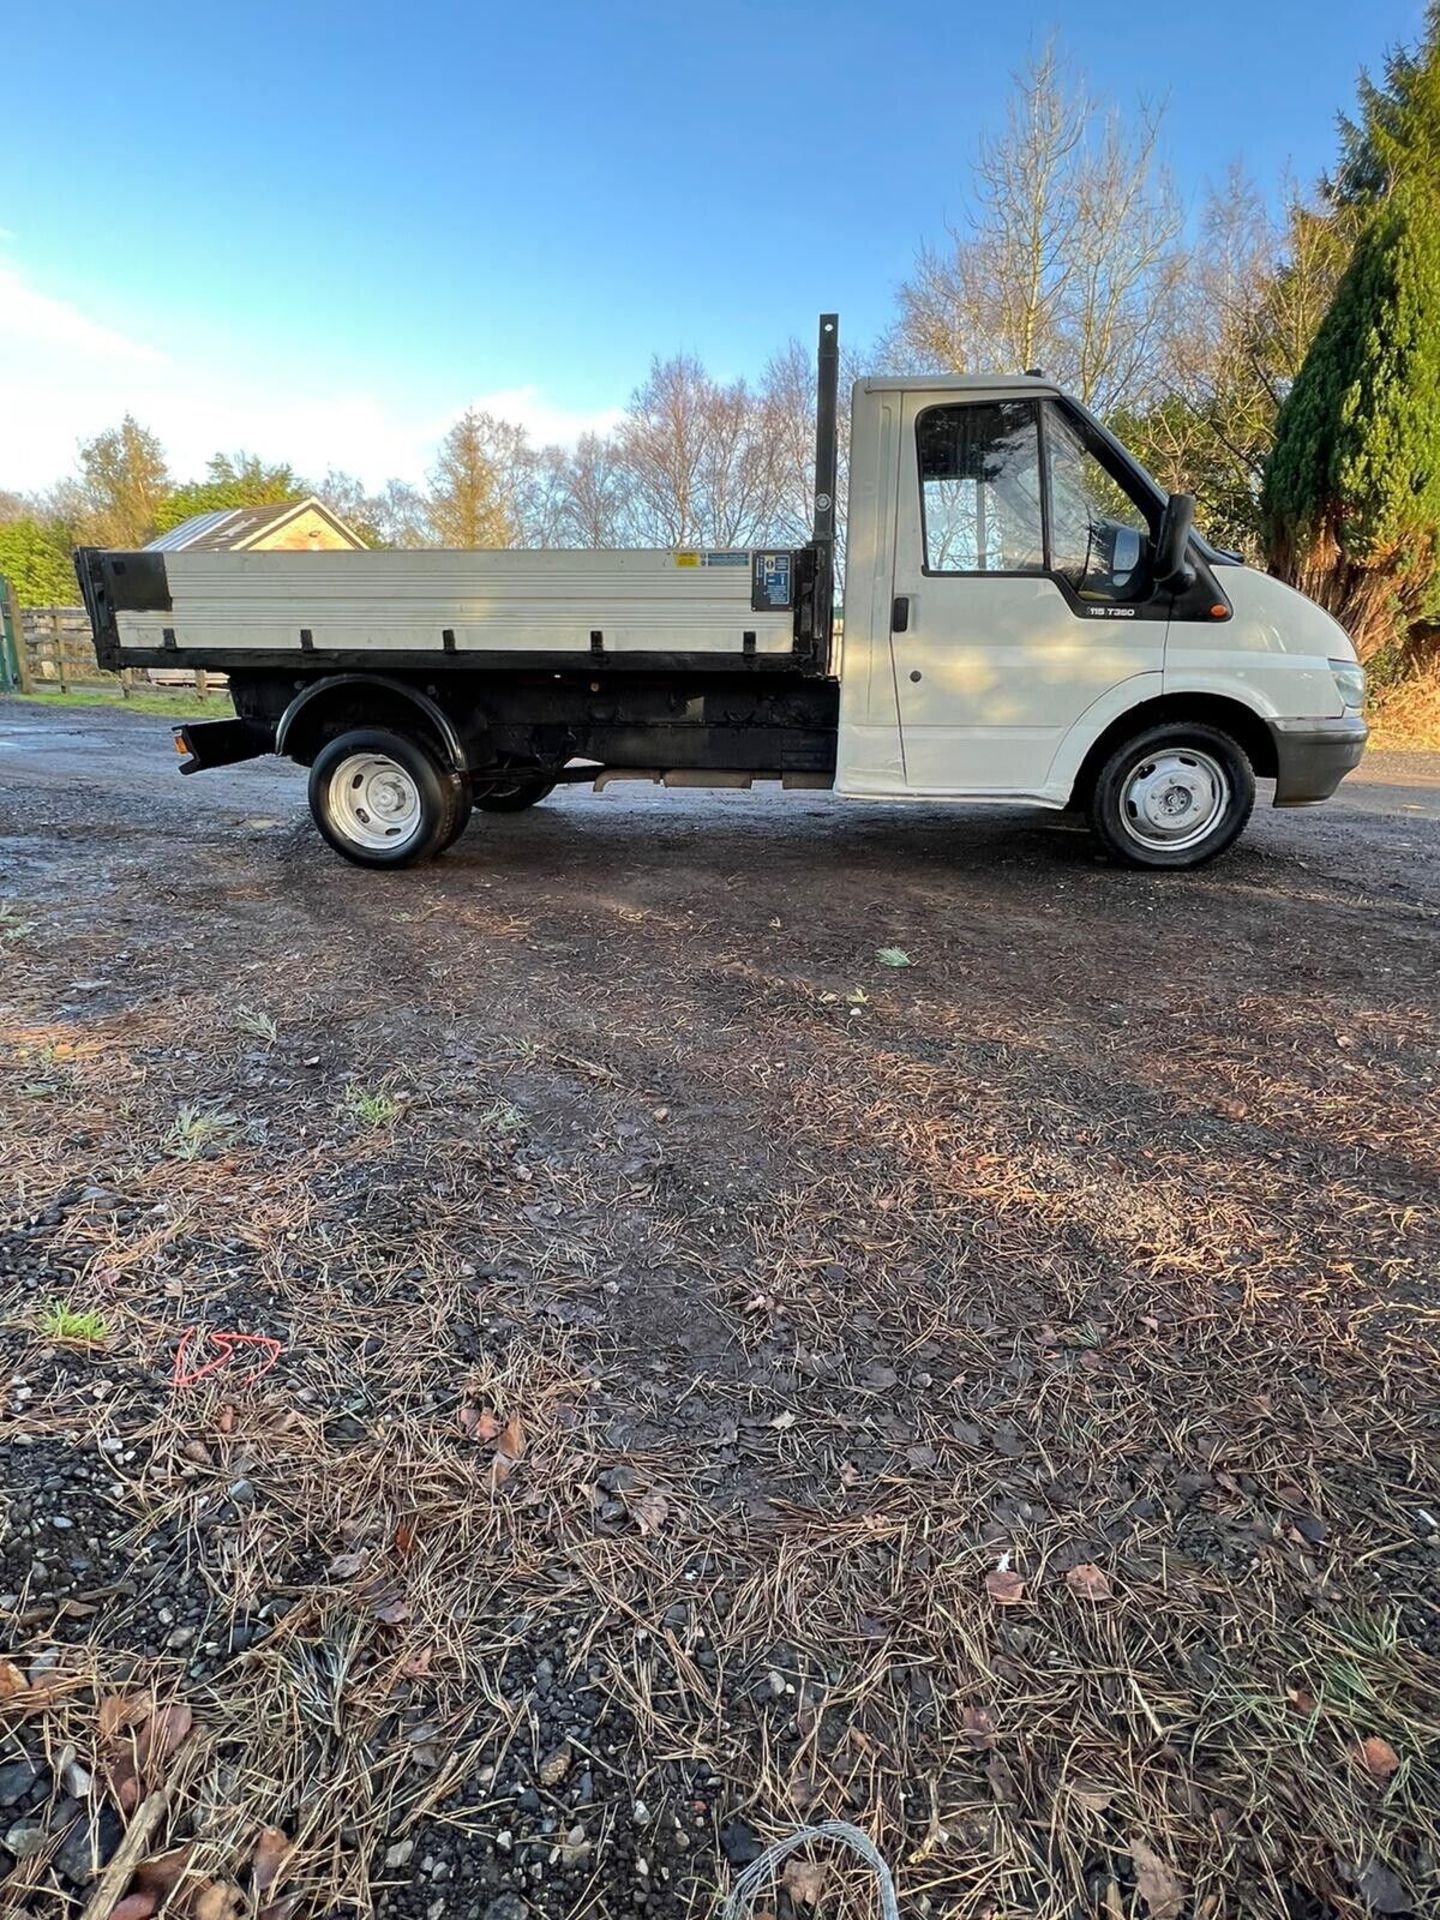 FORD TRANSIT TIPPER LORRY TWIN WHEEL TIPPING TRUCK LONG TEST MANUAL 120K 2006